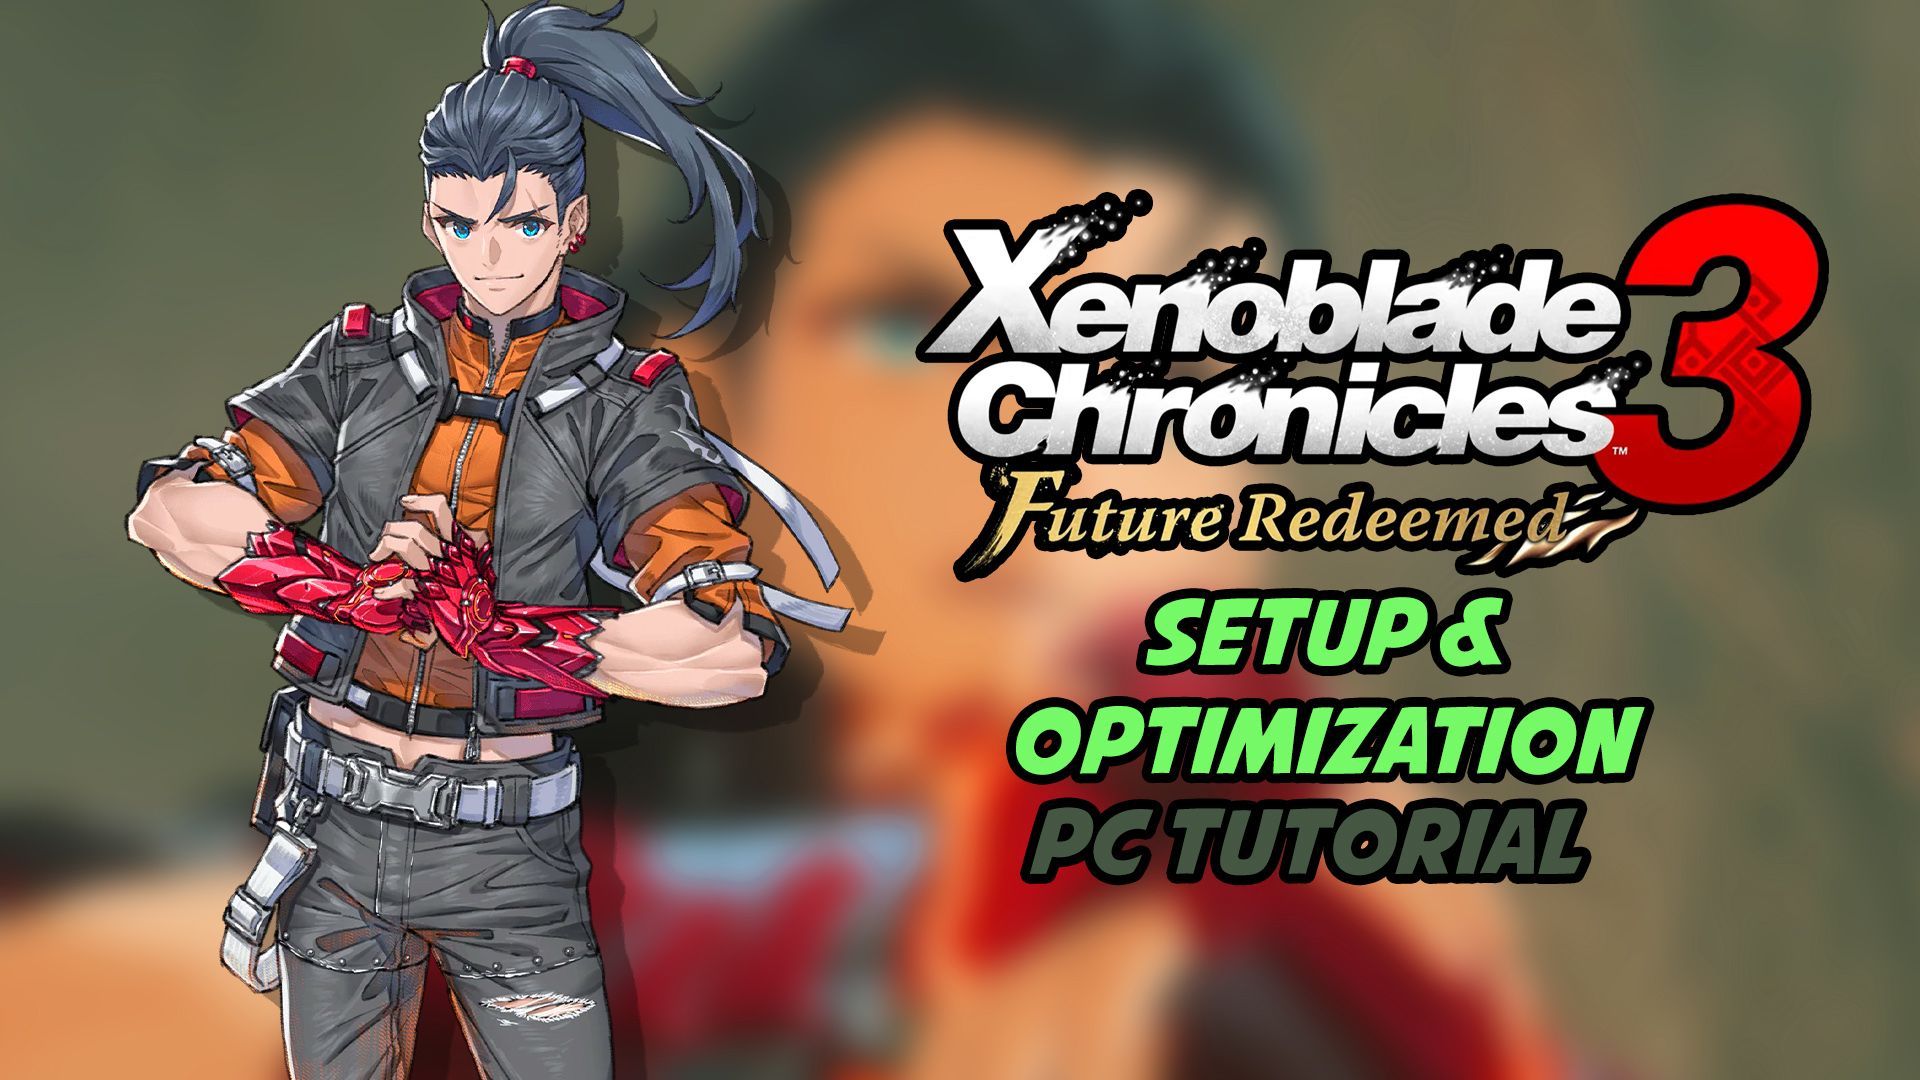 Xenoblade Chronicles 3 Future Redeemed DLC Now Available - Noisy Pixel